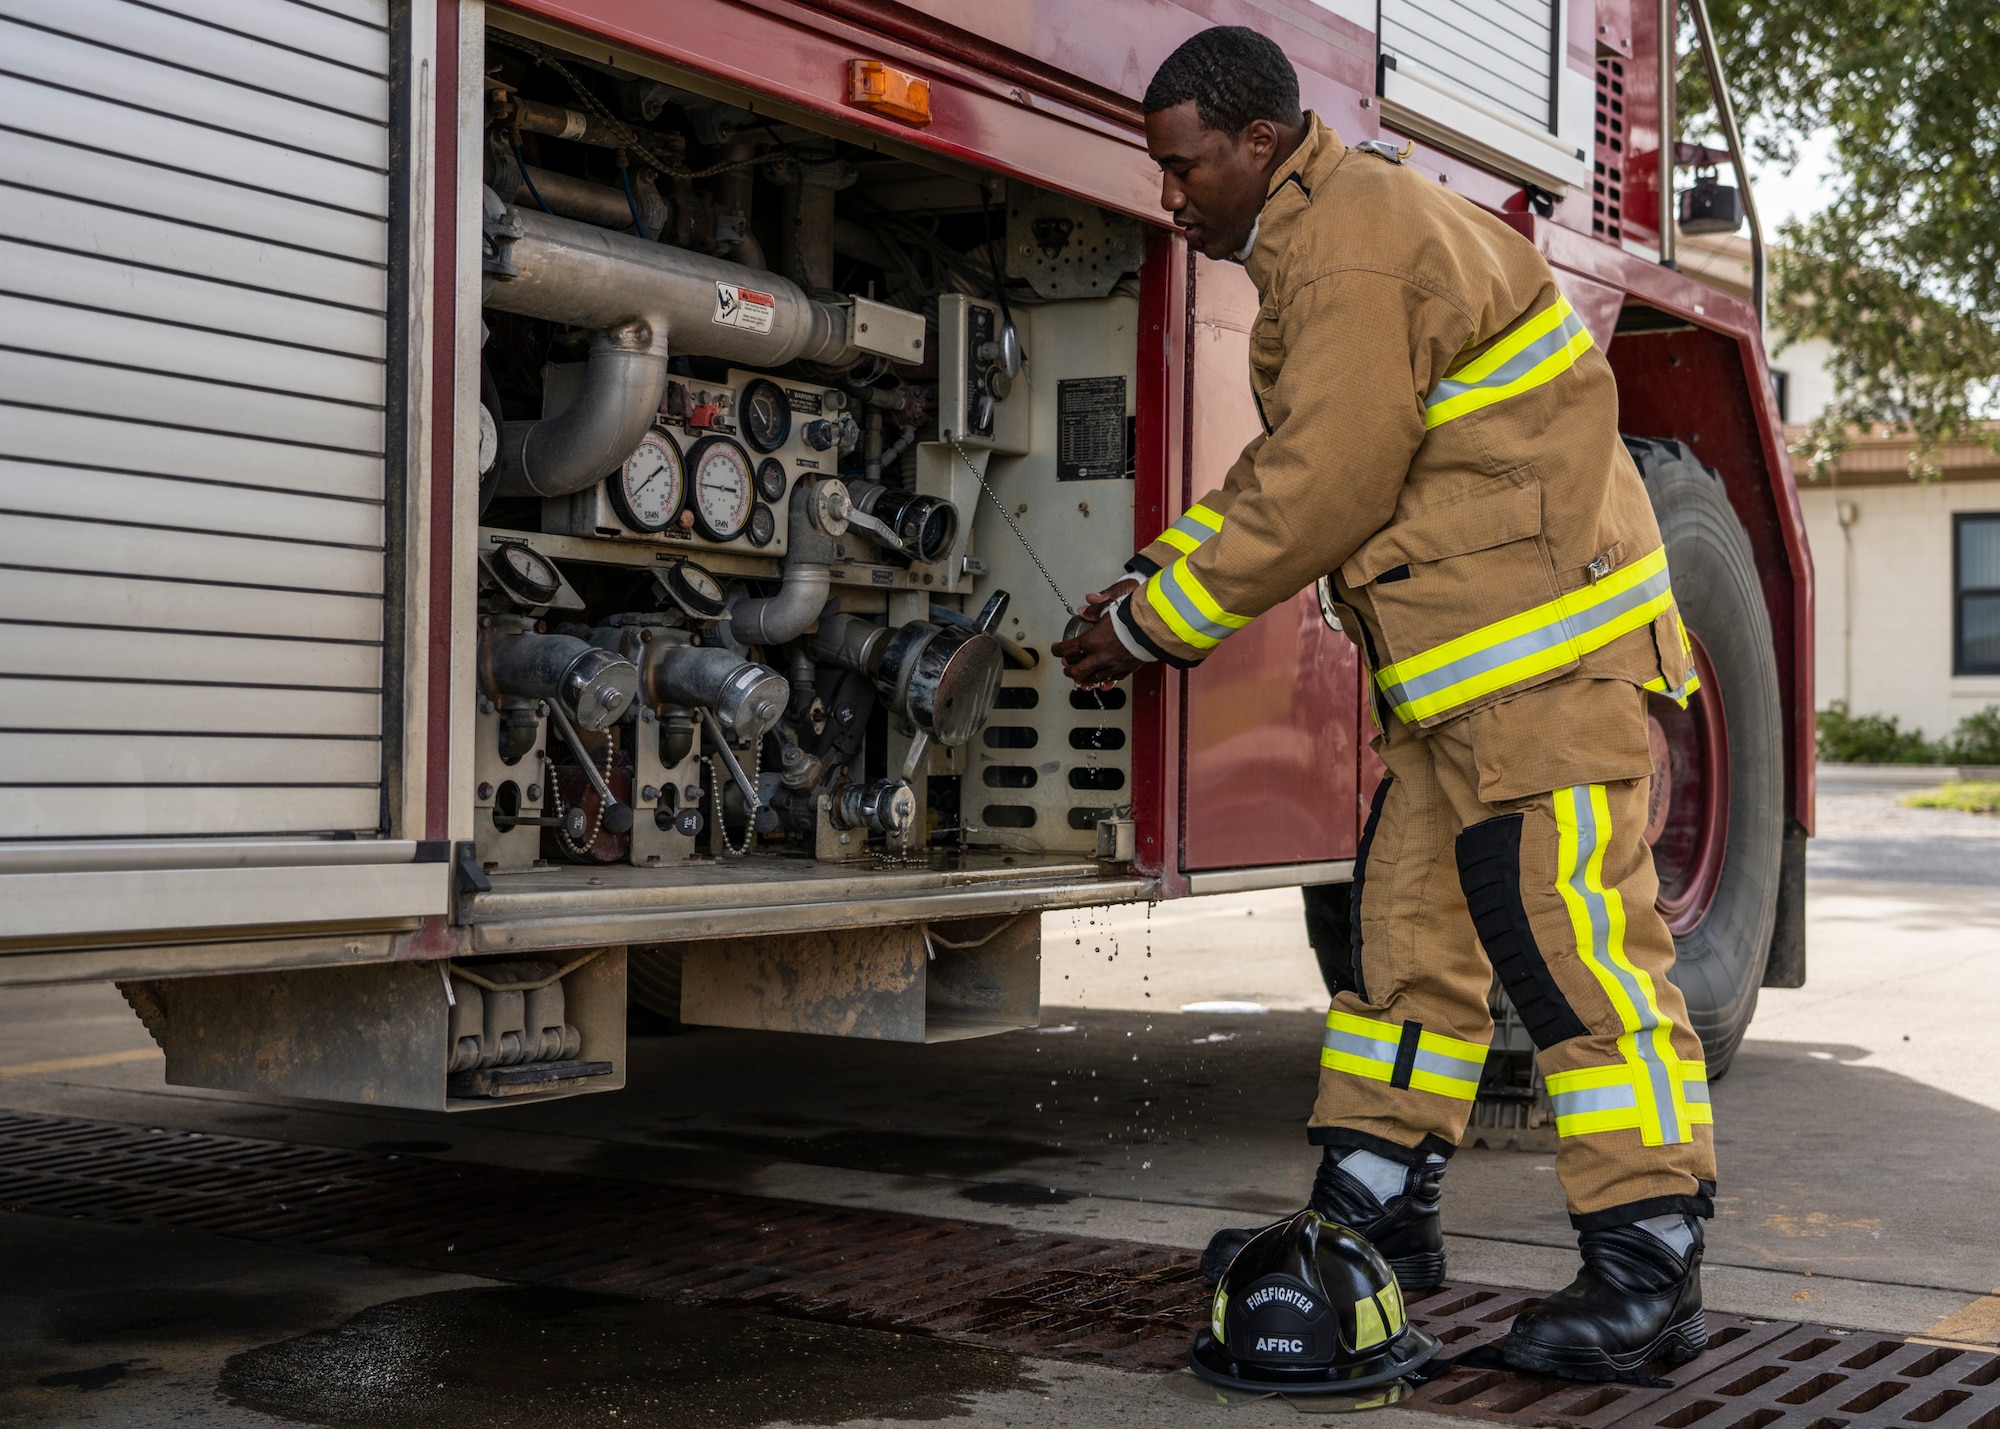 Staff Sgt. Adias Tolliver, 919th Special Operations Civil Engineer Squadron driver operator, demonstrates the use of a water intake valve on a fire engine at Duke Field, Florida, Oct. 4, 2020.